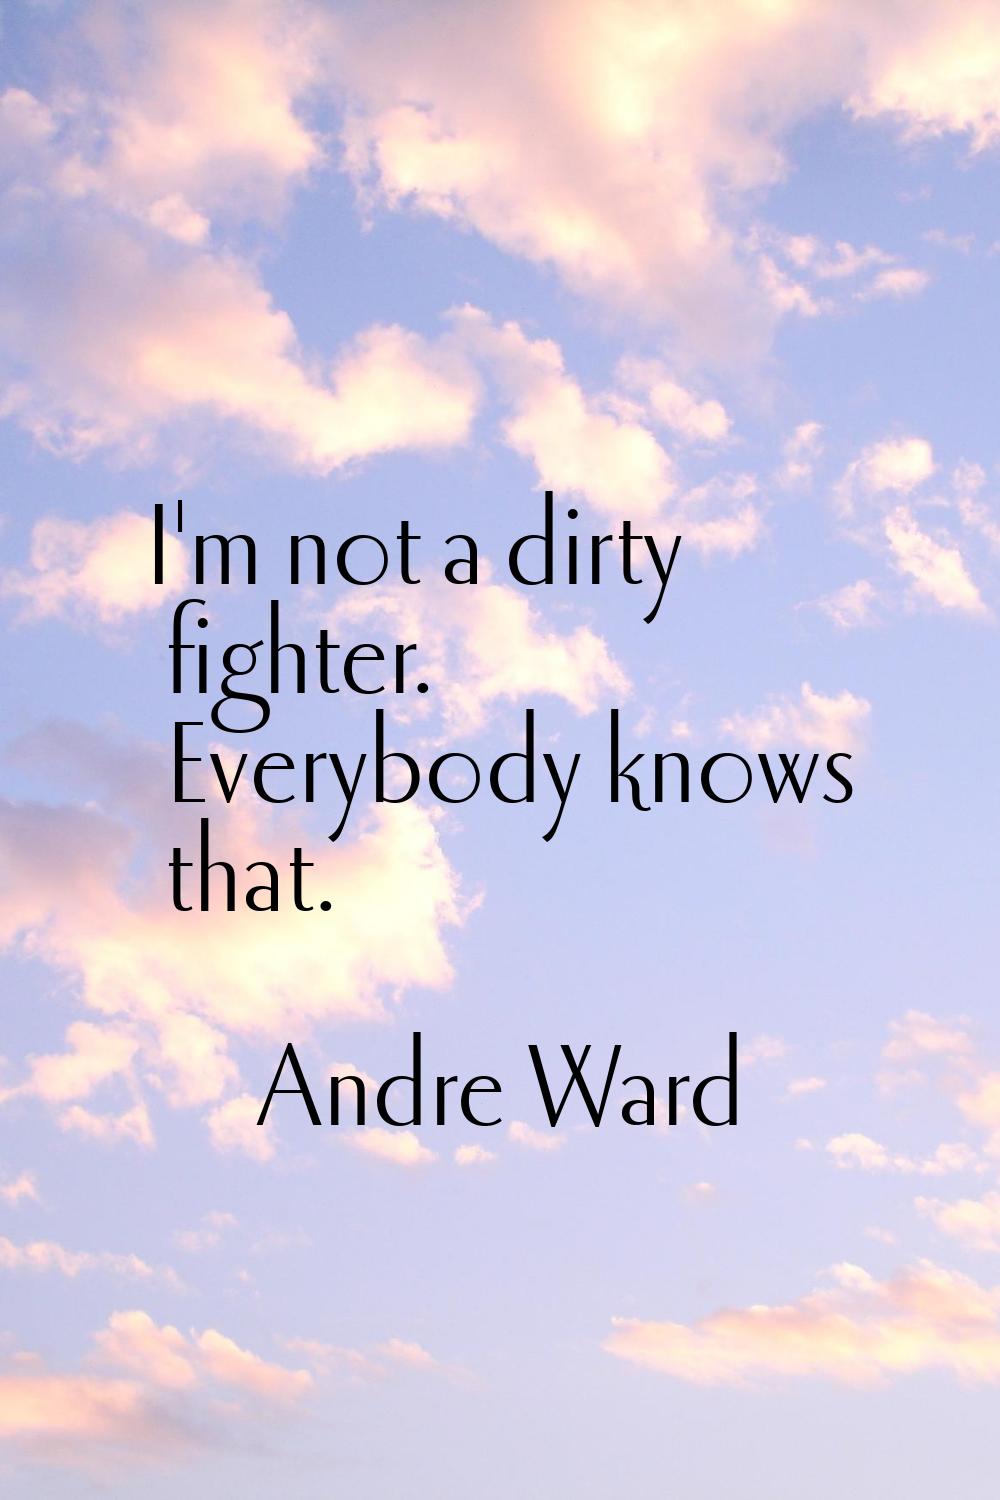 I'm not a dirty fighter. Everybody knows that.